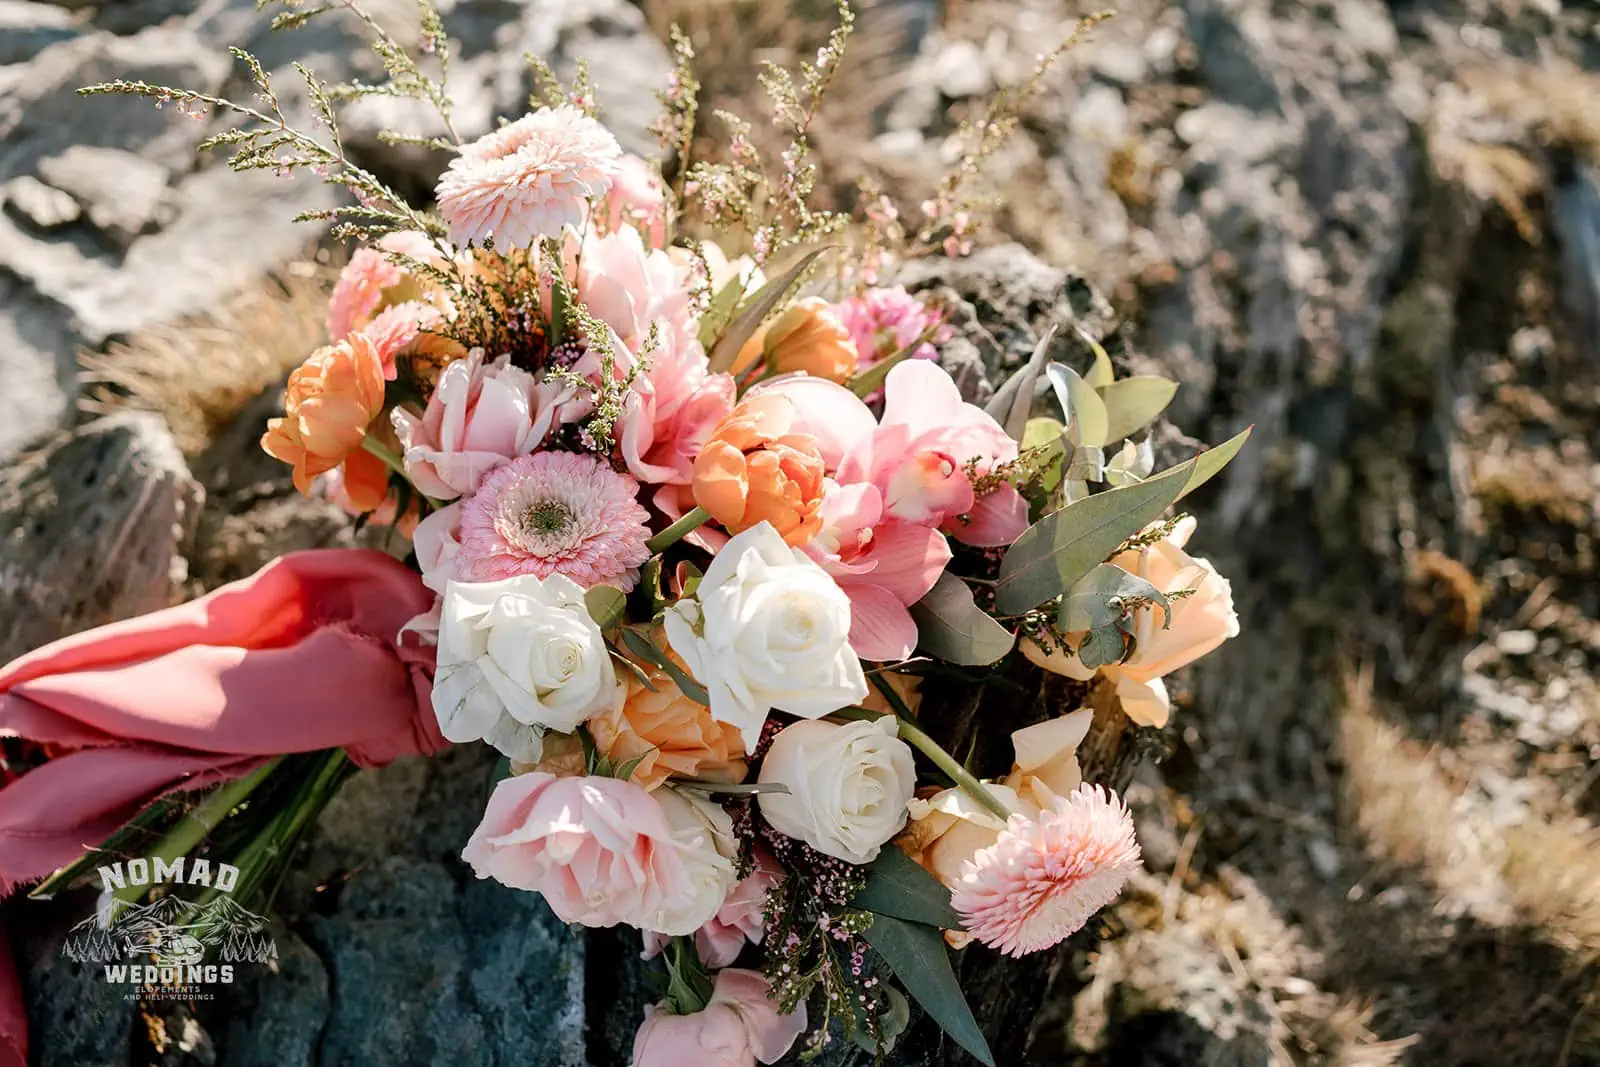 Queenstown New Zealand Elopement Wedding Photographer - Bo and Junyi's Heli Pre Wedding Shoot included a bouquet of pink and peach flowers on a rock.